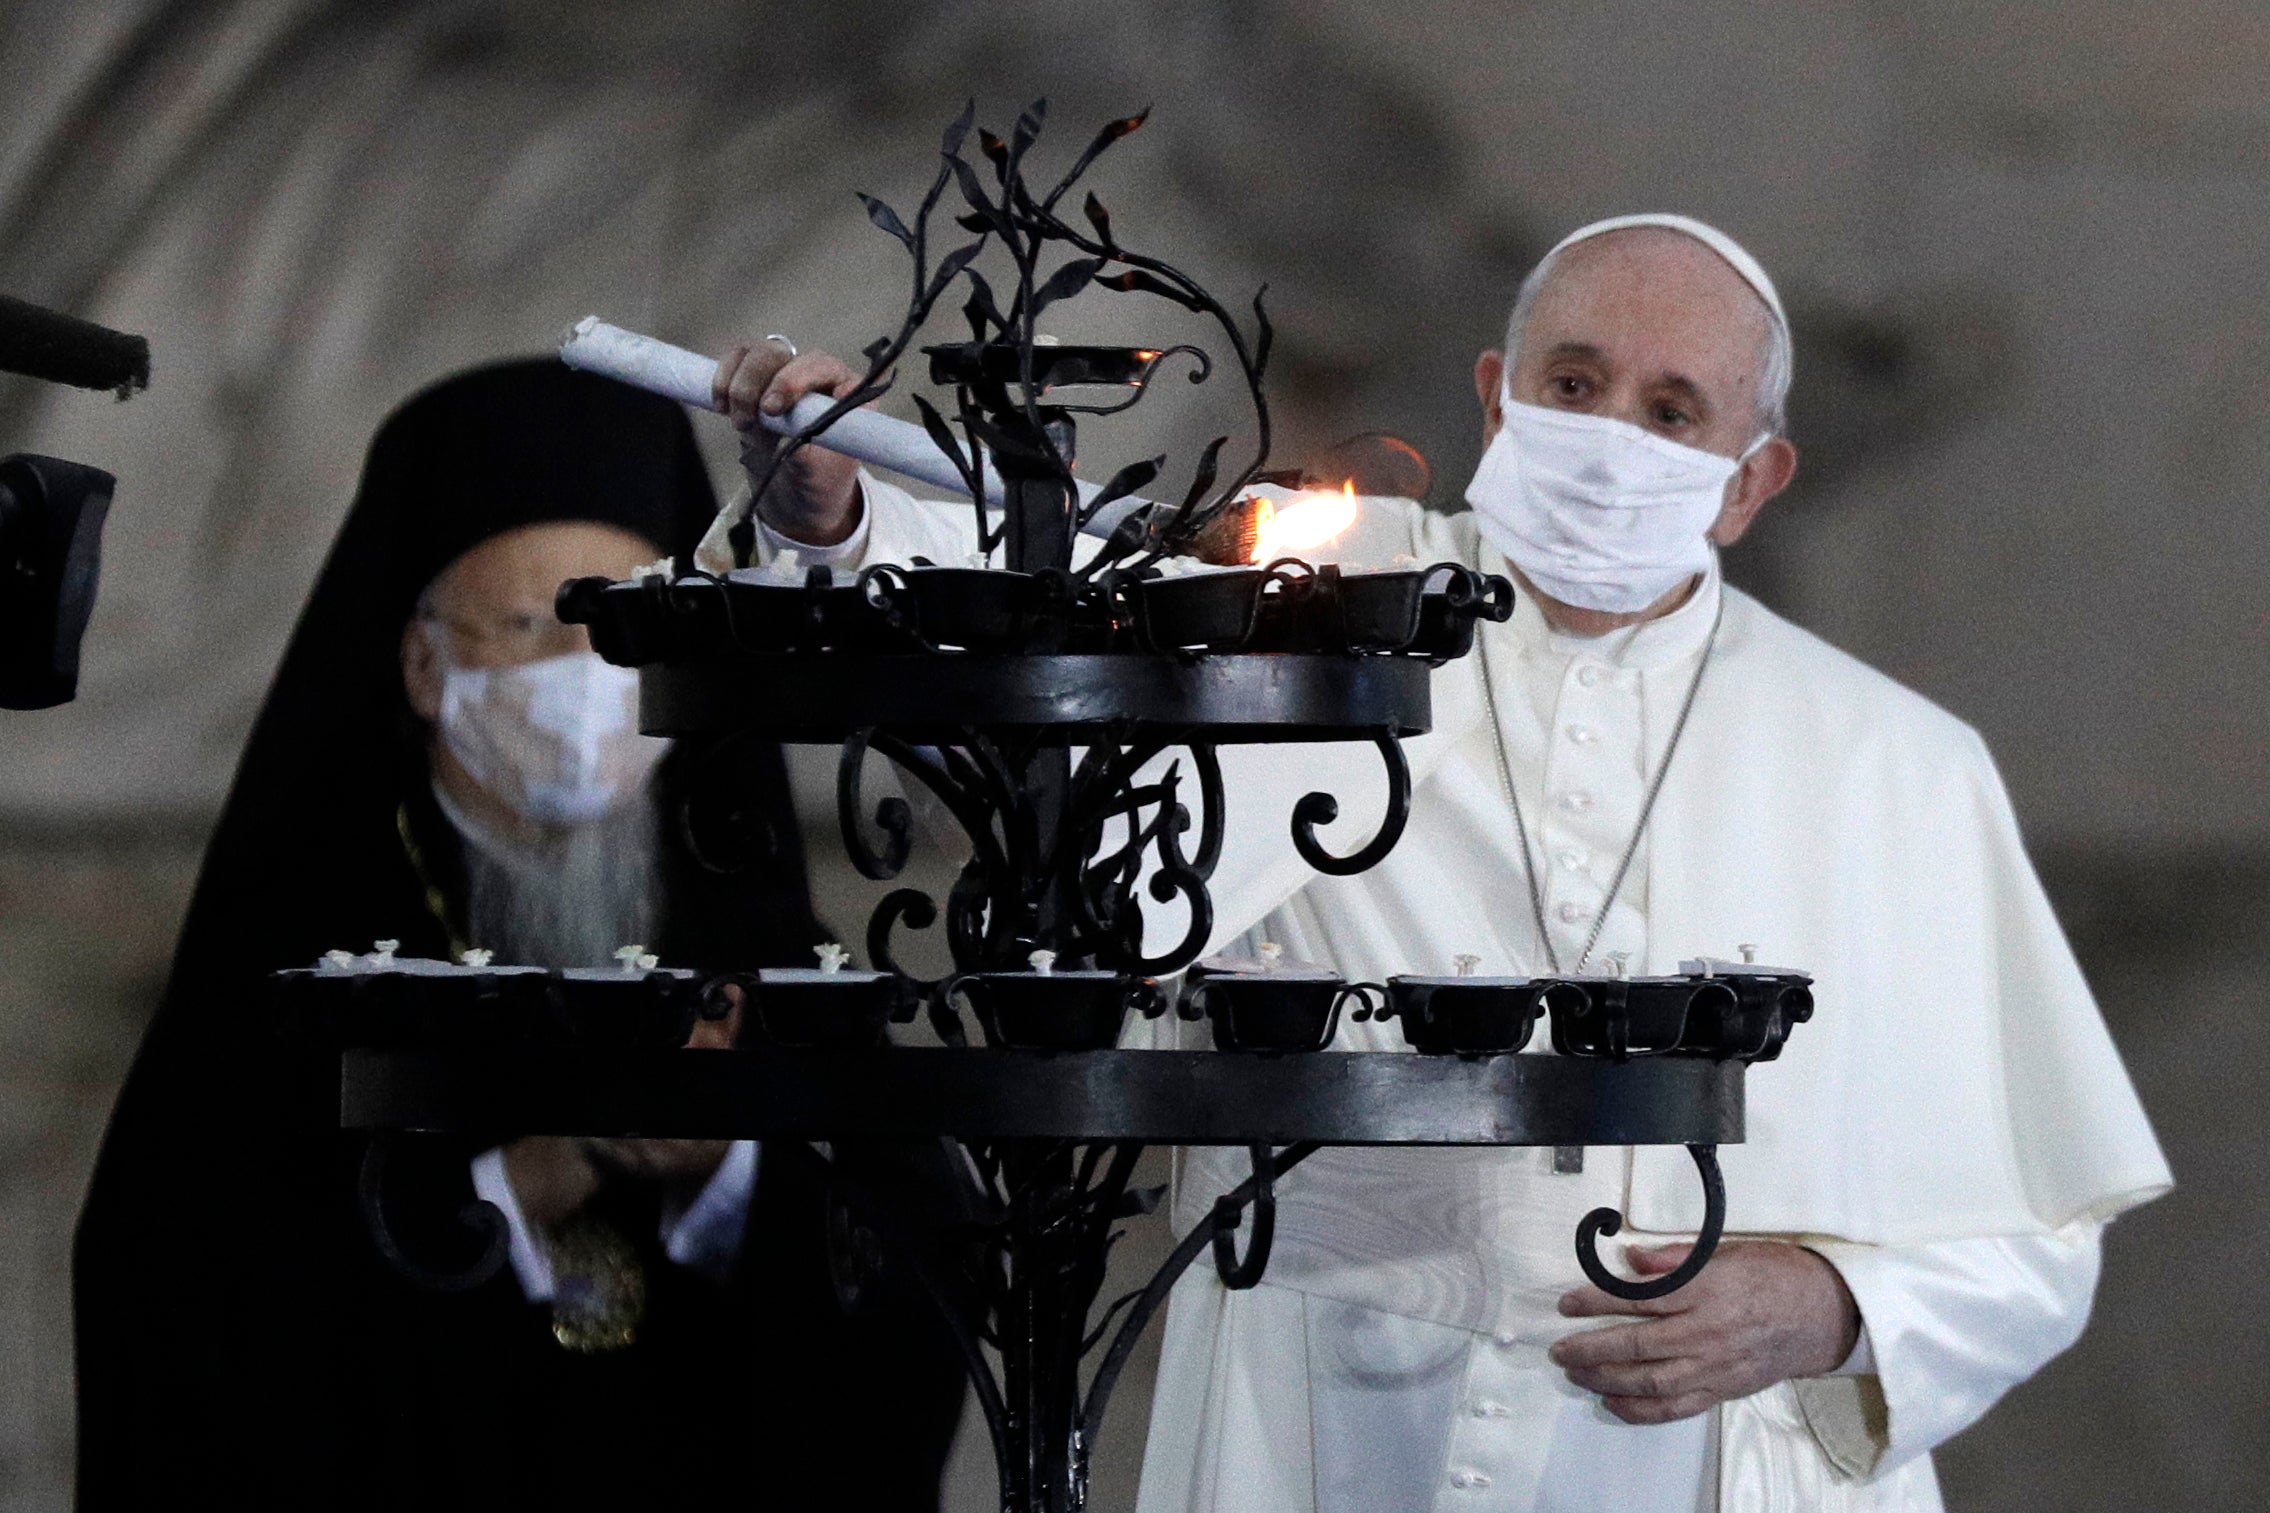 The Pope lights a candle for peace with other religious leaders